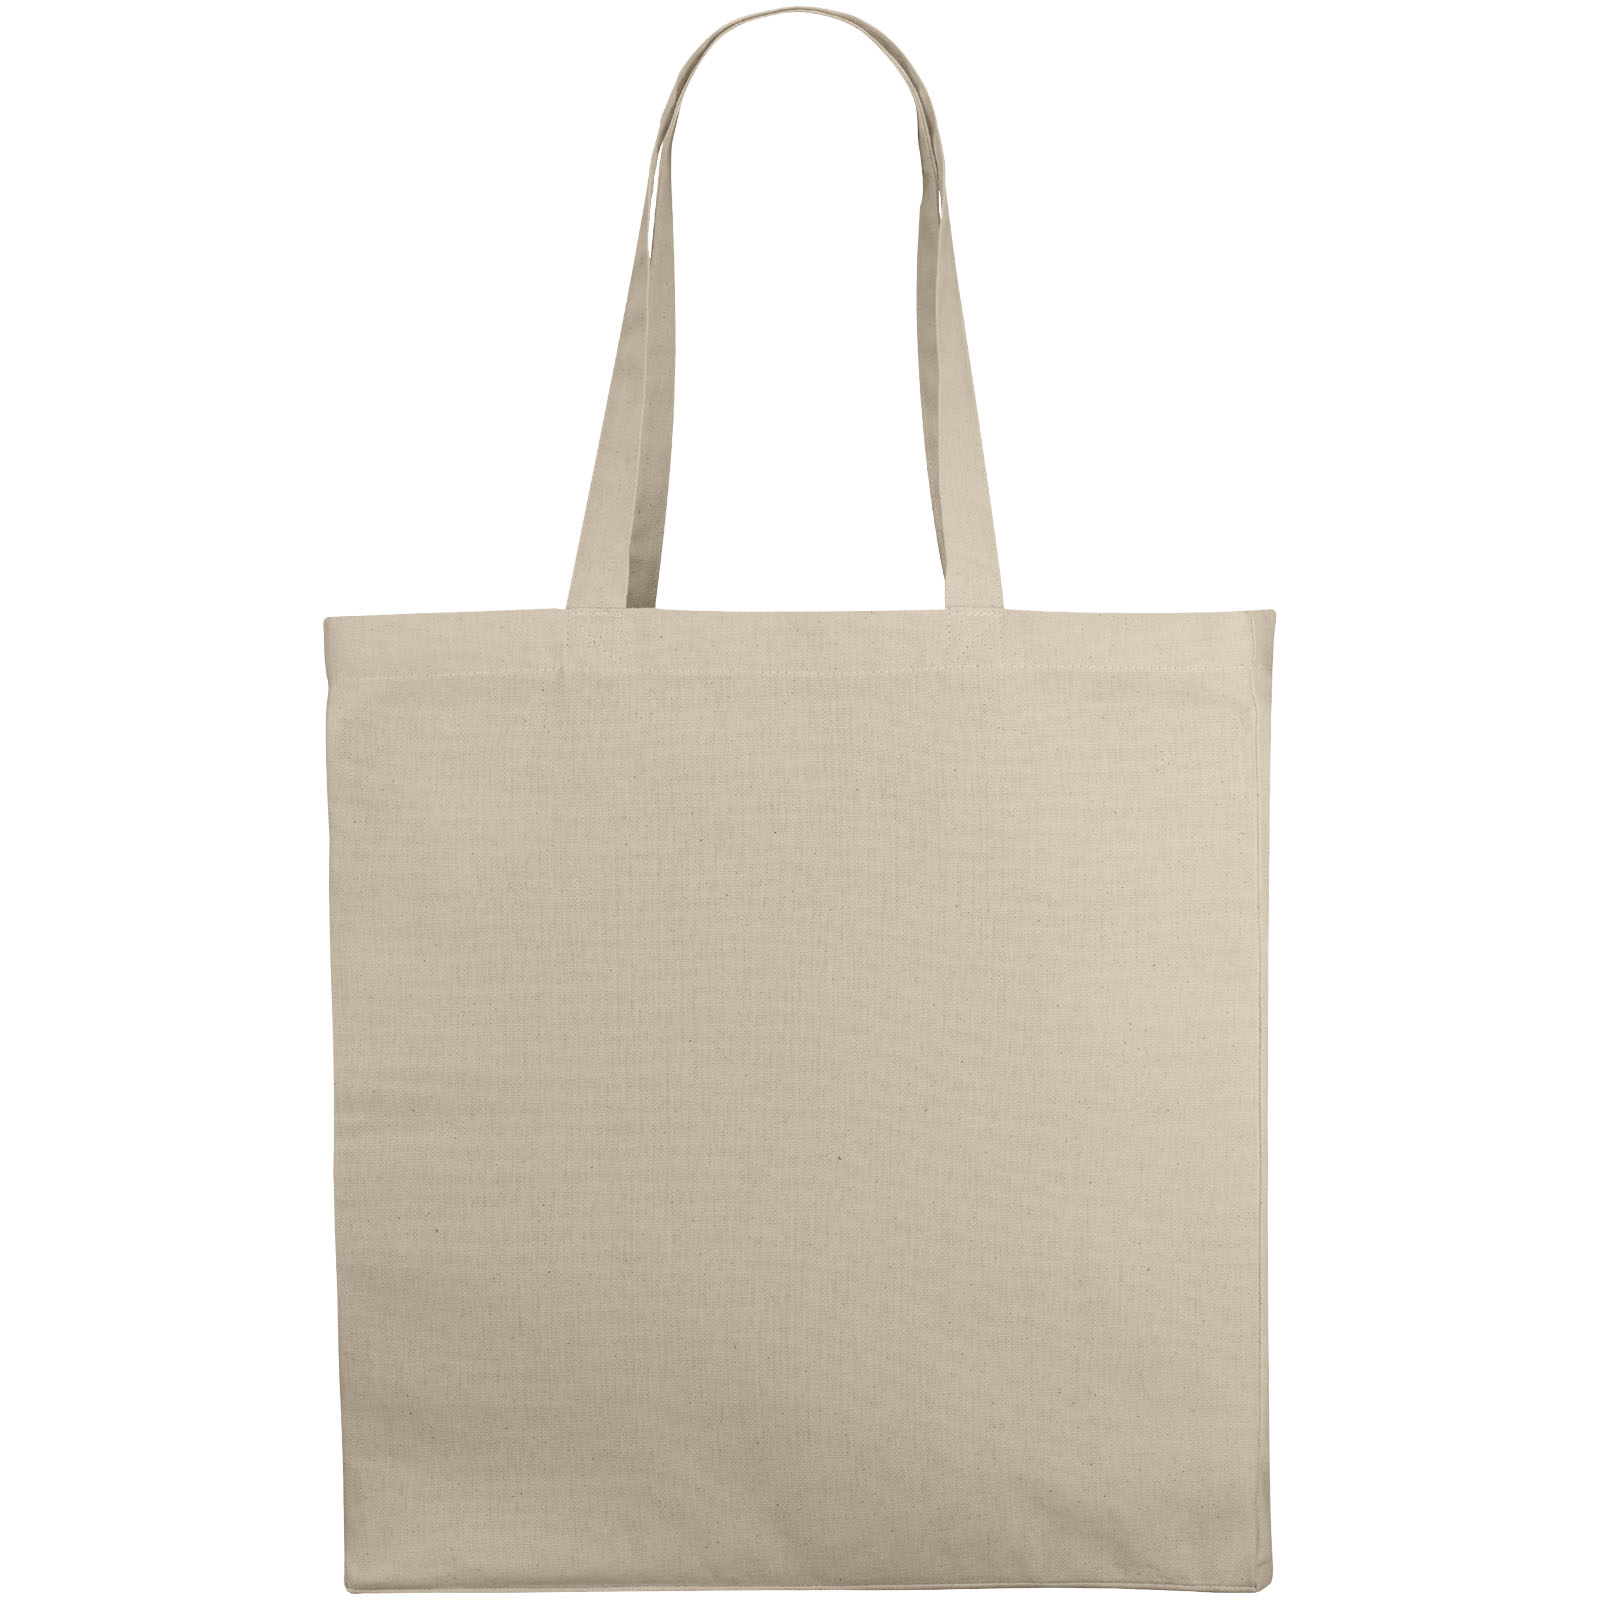 Advertising Shopping & Tote Bags - Odessa 220 g/m² cotton tote bag 13L - 1